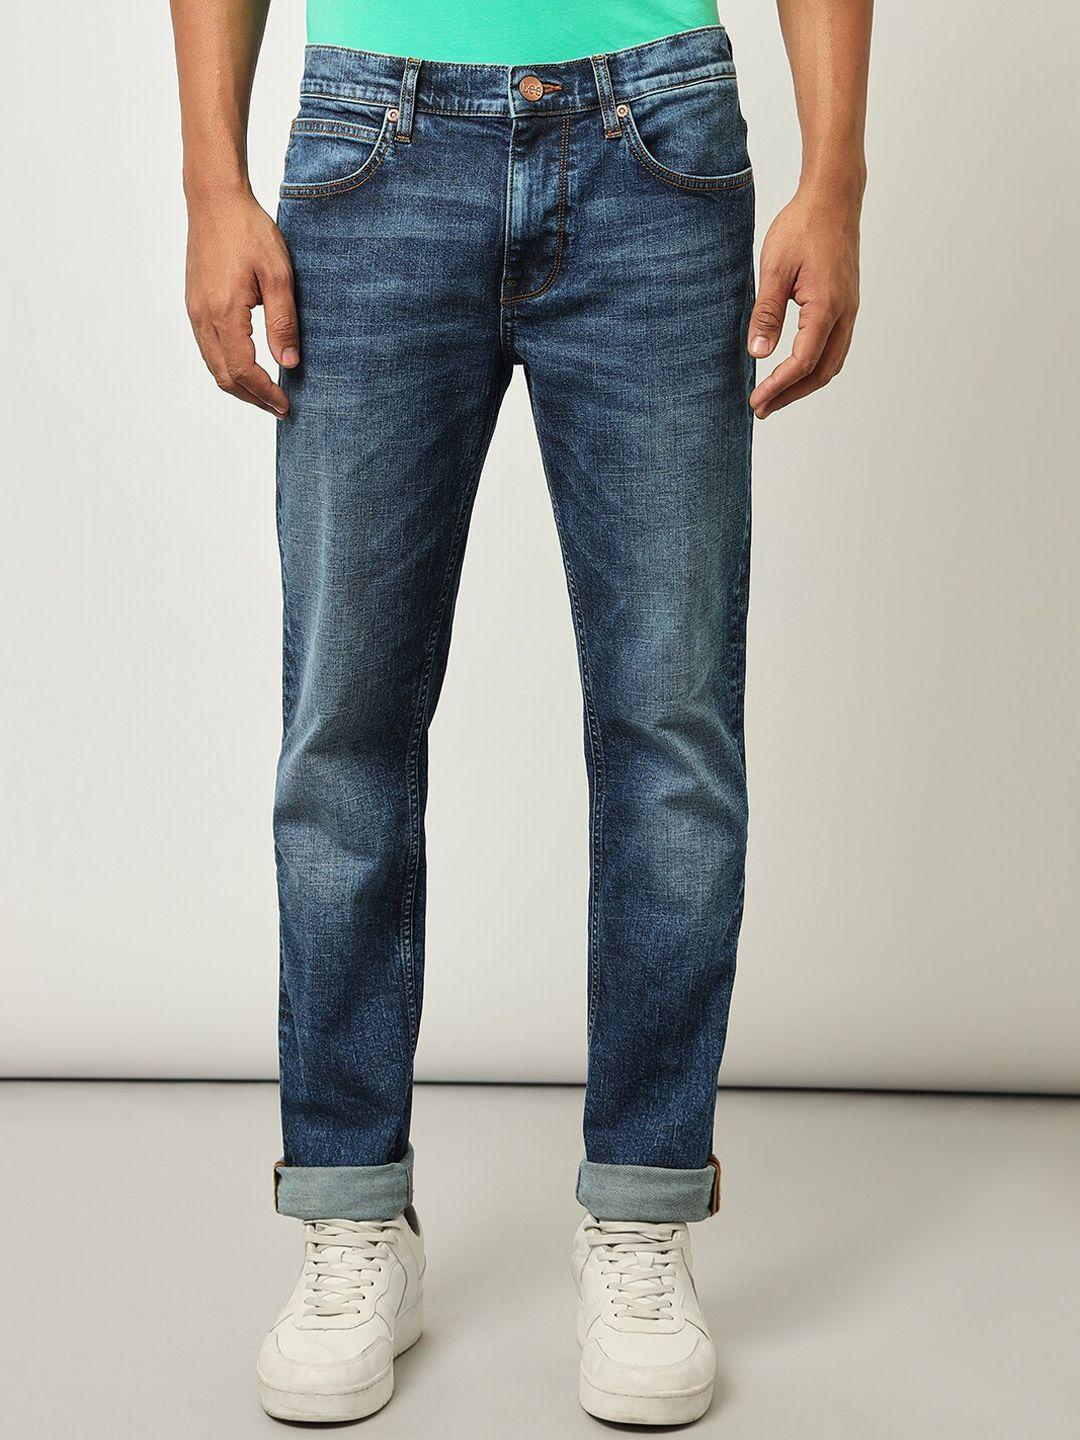 lee-men-slim-fit-mid-rise-clean-look-light-fade-stretchable-jeans